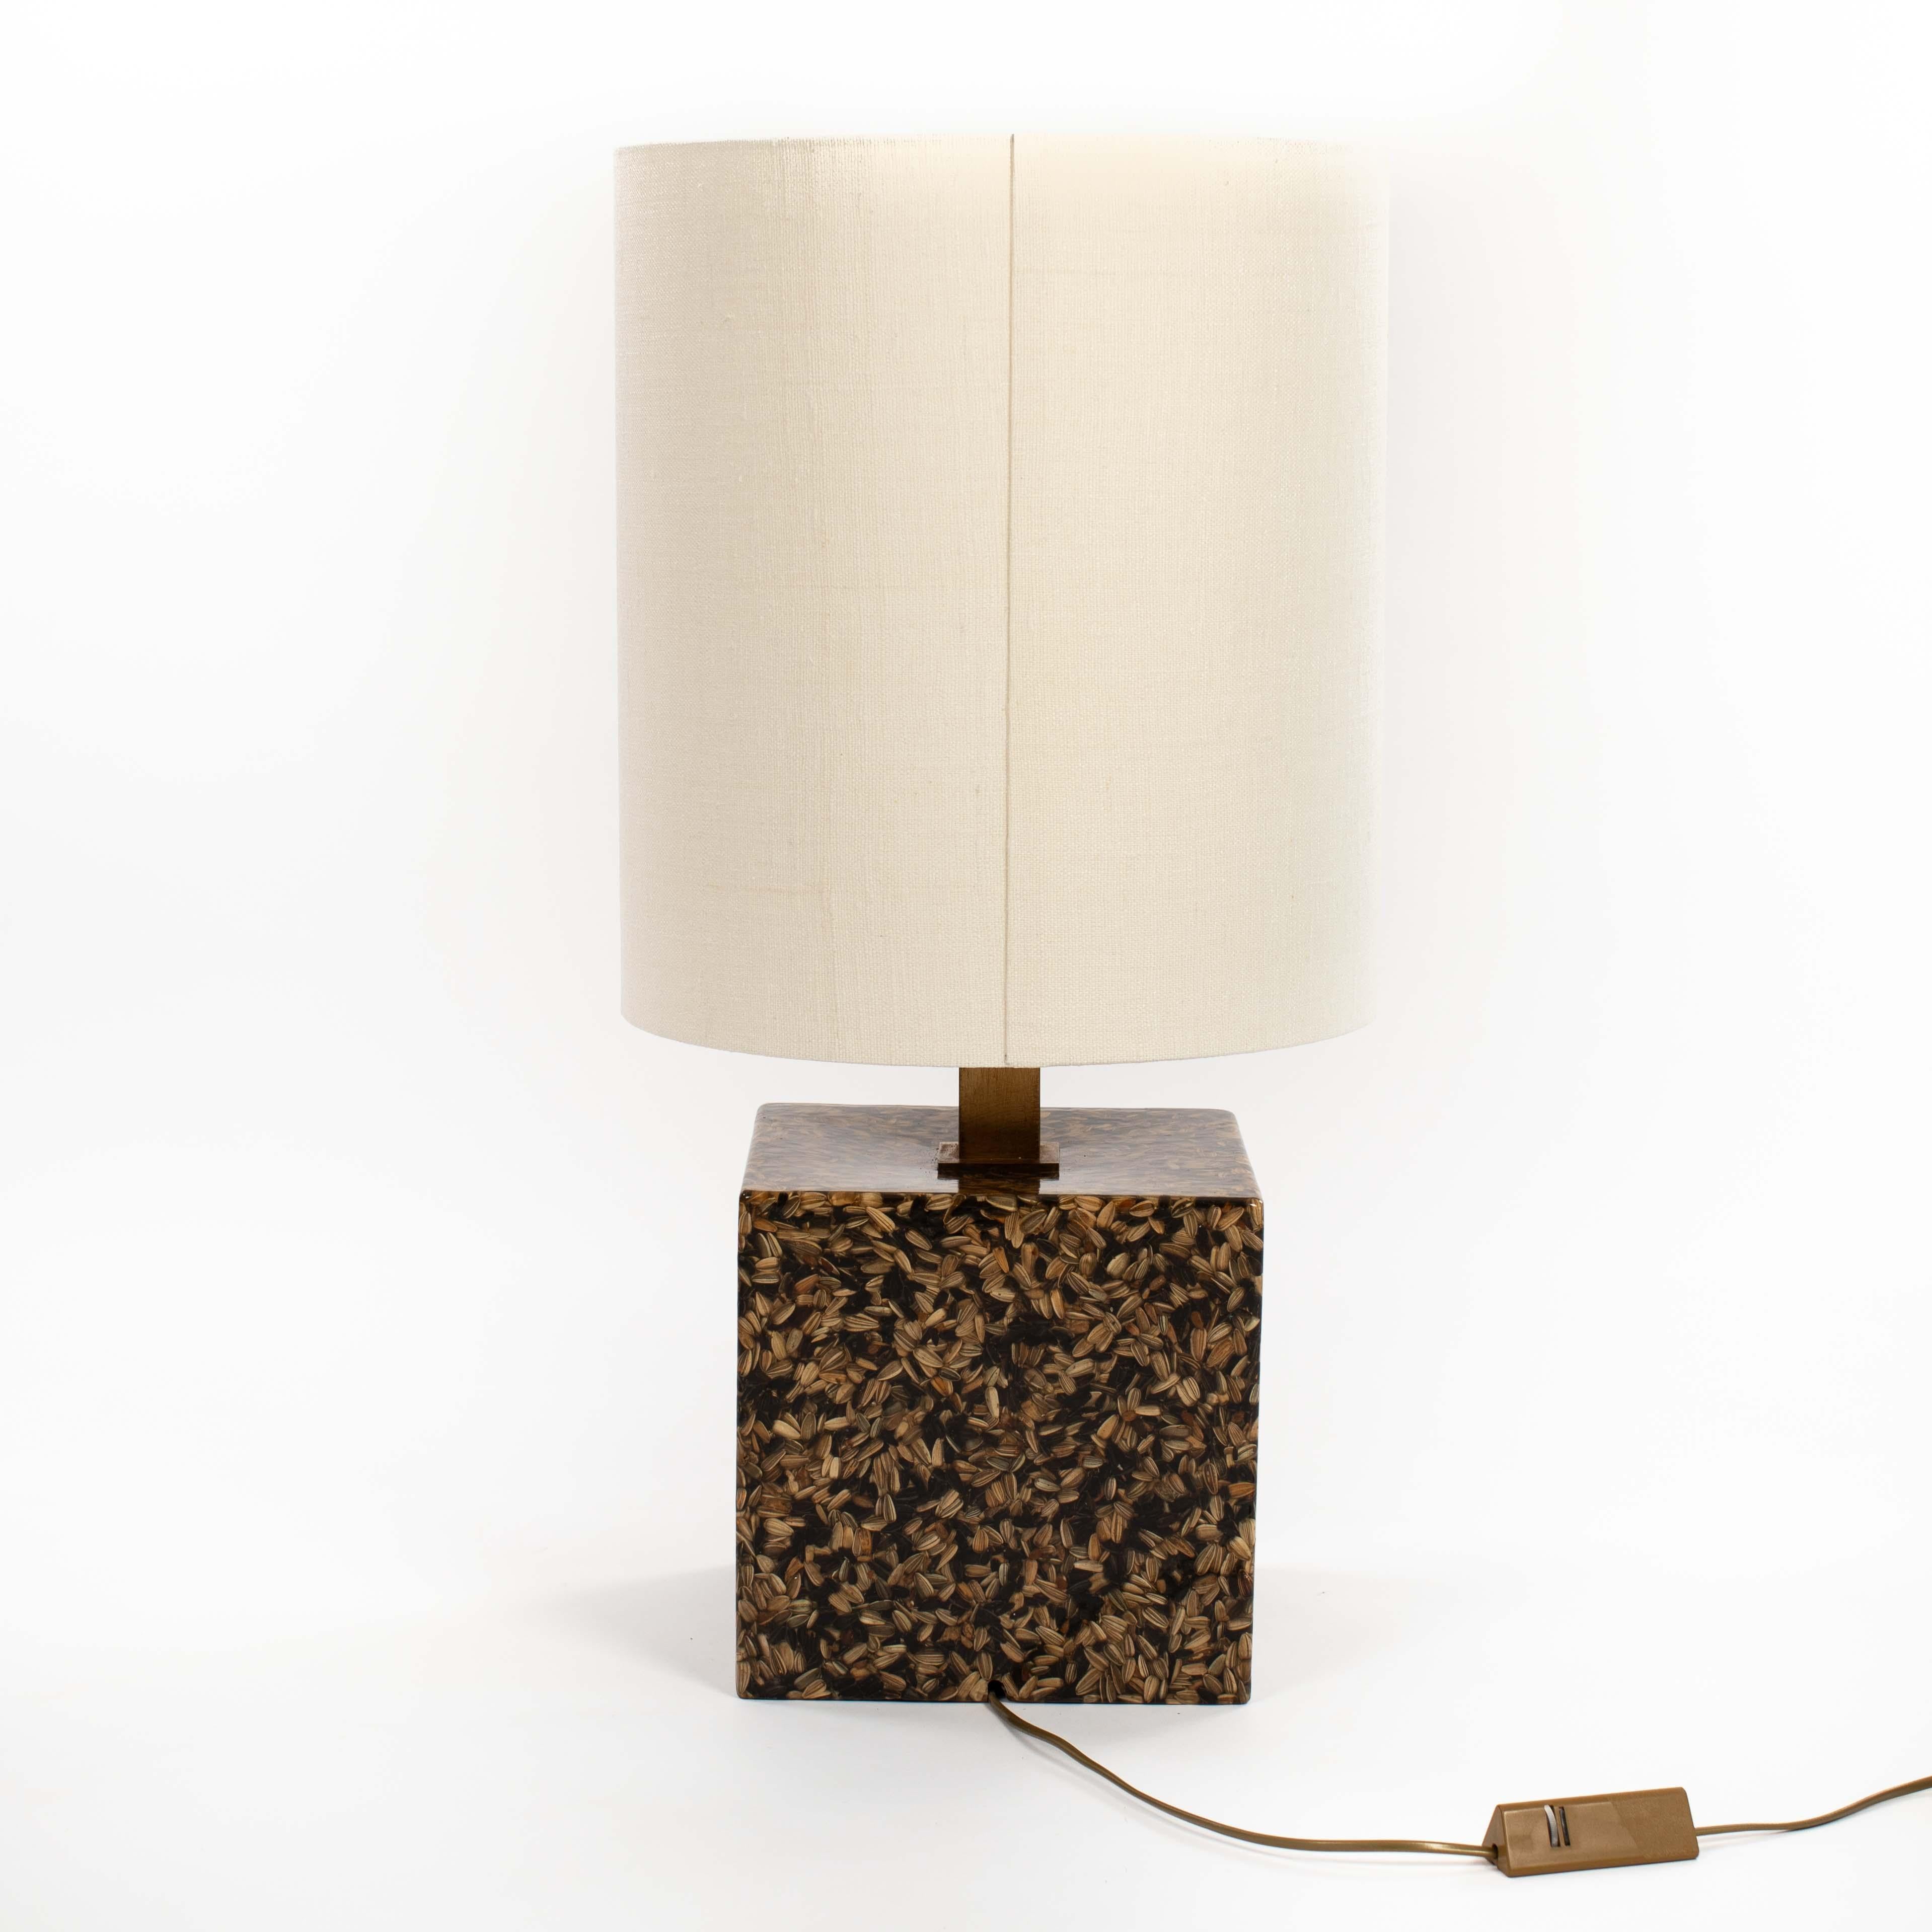 Hand-Crafted Italian Mid-Century Table Lamp out of Sunflower Seeds and Resin R. Mazzi 1970s  For Sale